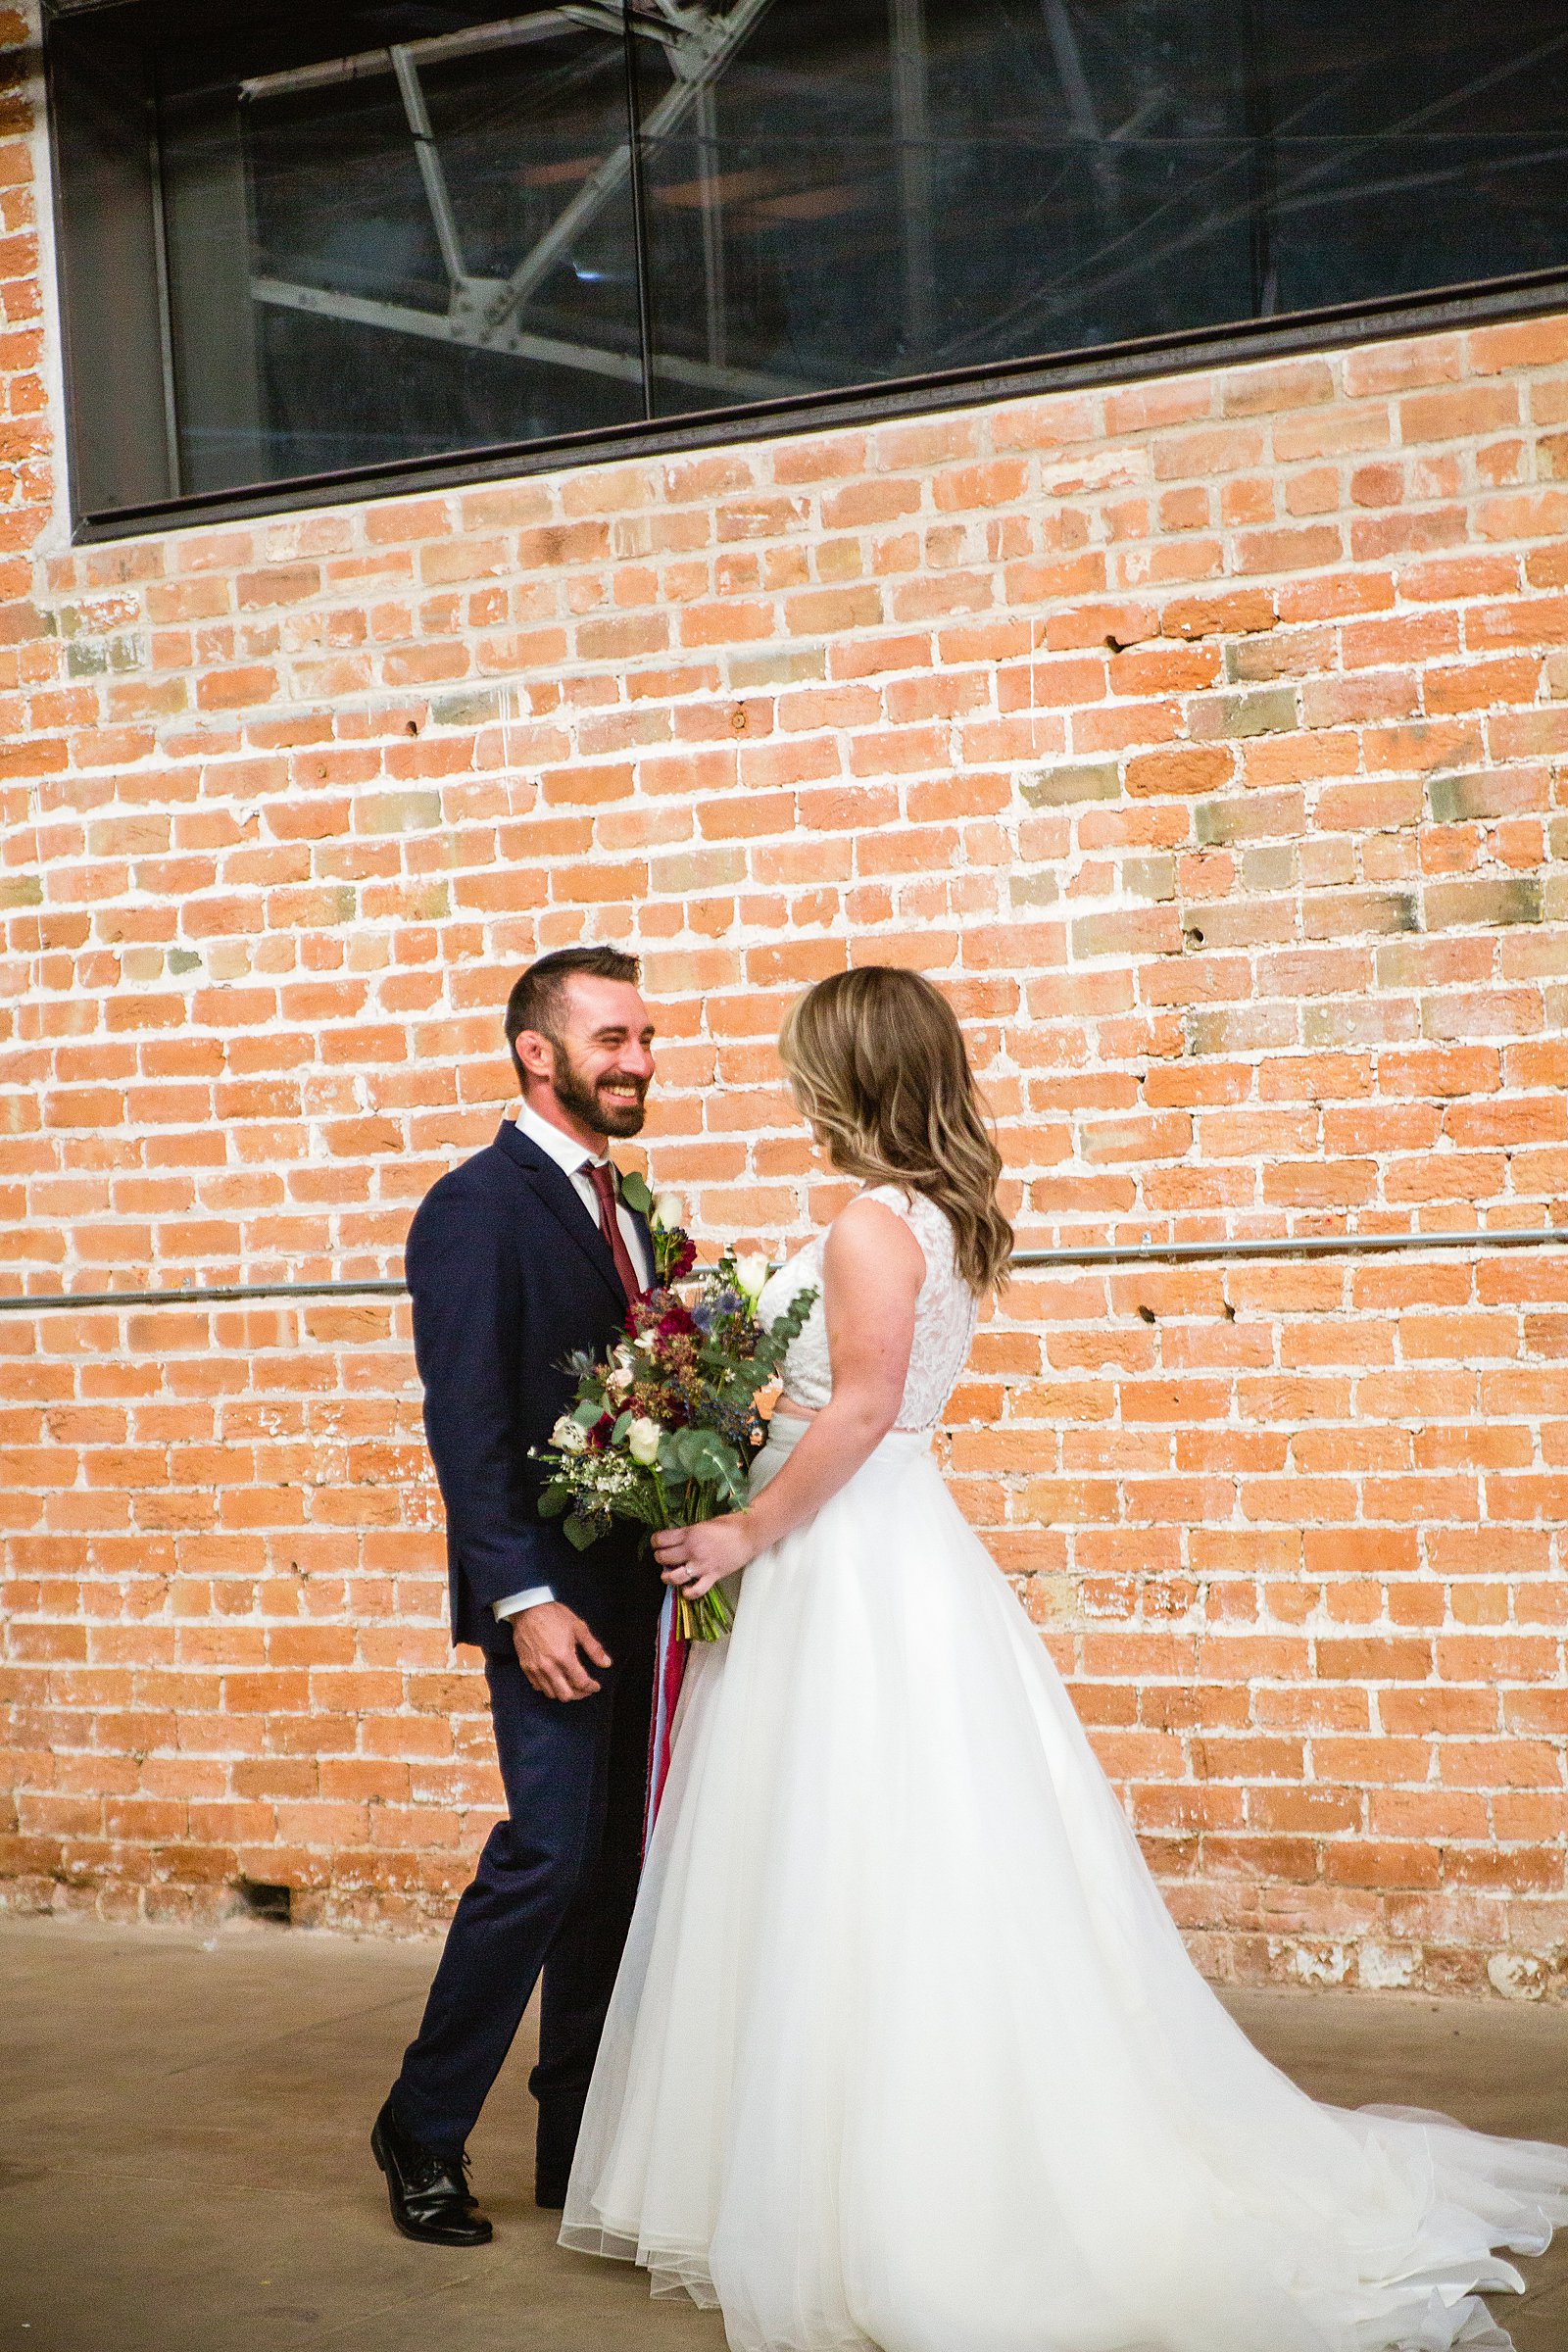 Bride and Groom share an intimate moment during their first look at Sunkist Warehouse by Phoenix wedding photographer PMA Photography.